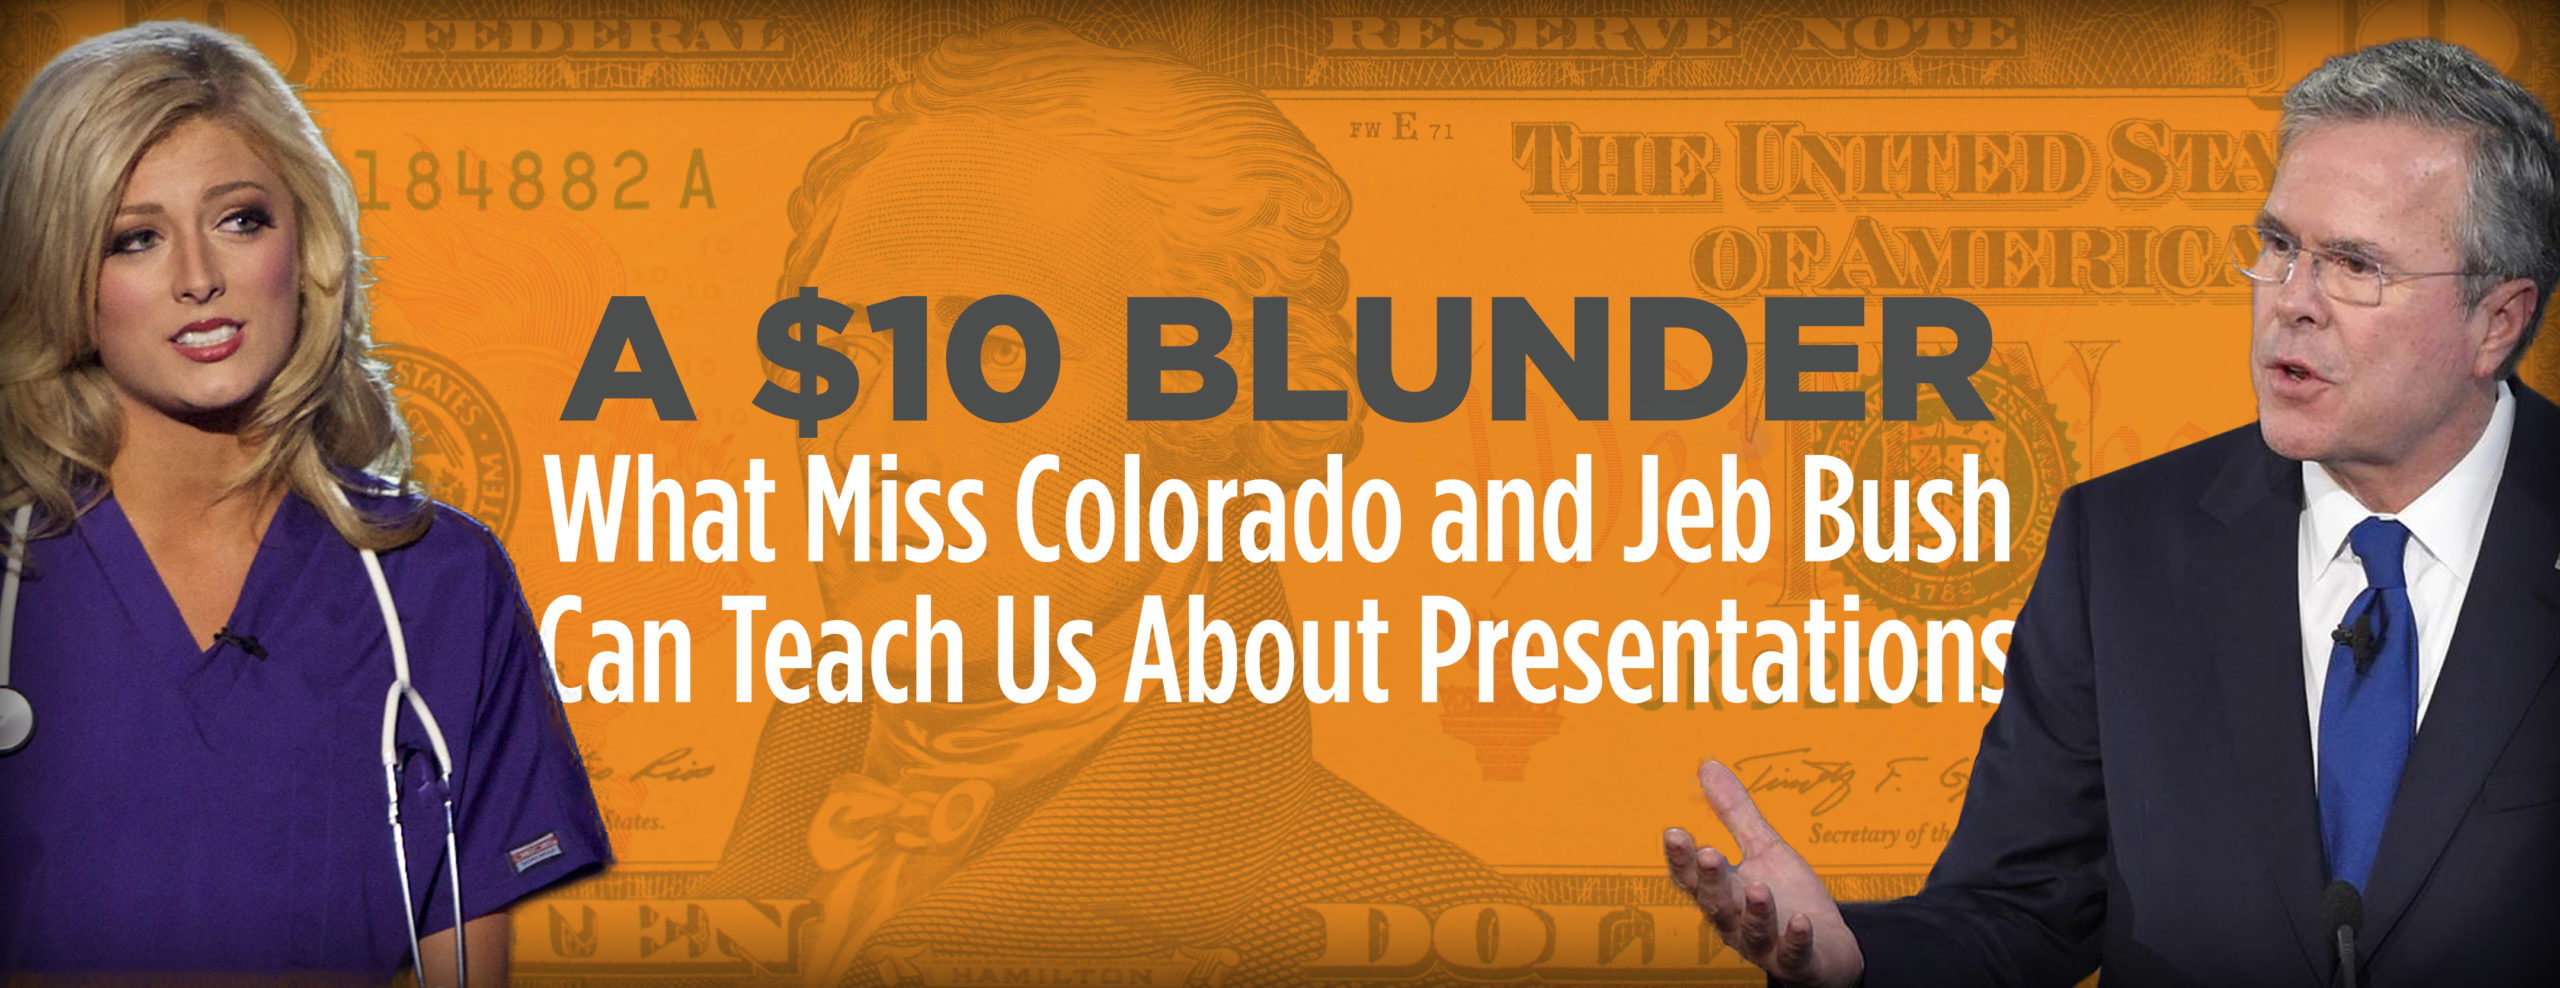 A $10 Blunder: What Miss Colorado and Jeb Bush Can Teach Us About Presentations